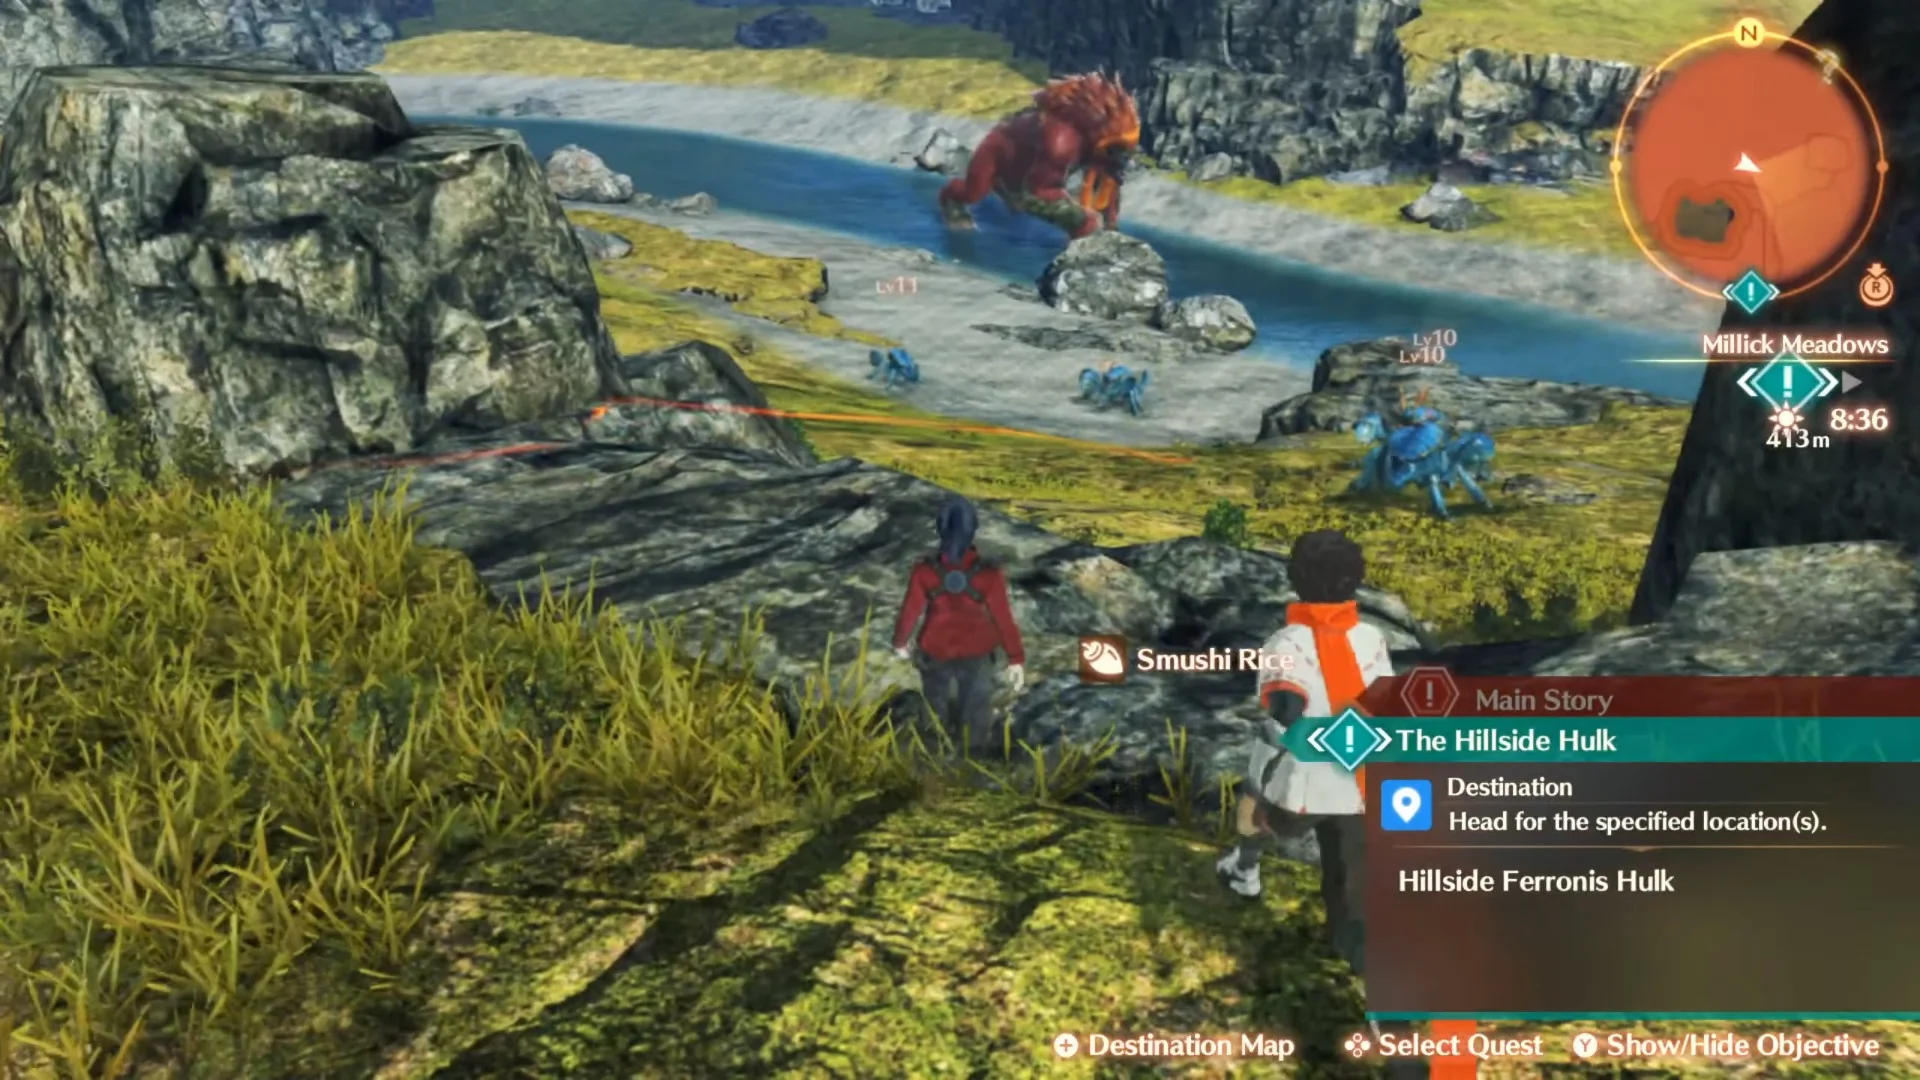 Xenoblade Chronicles 3 review: Top tier RPG storytelling